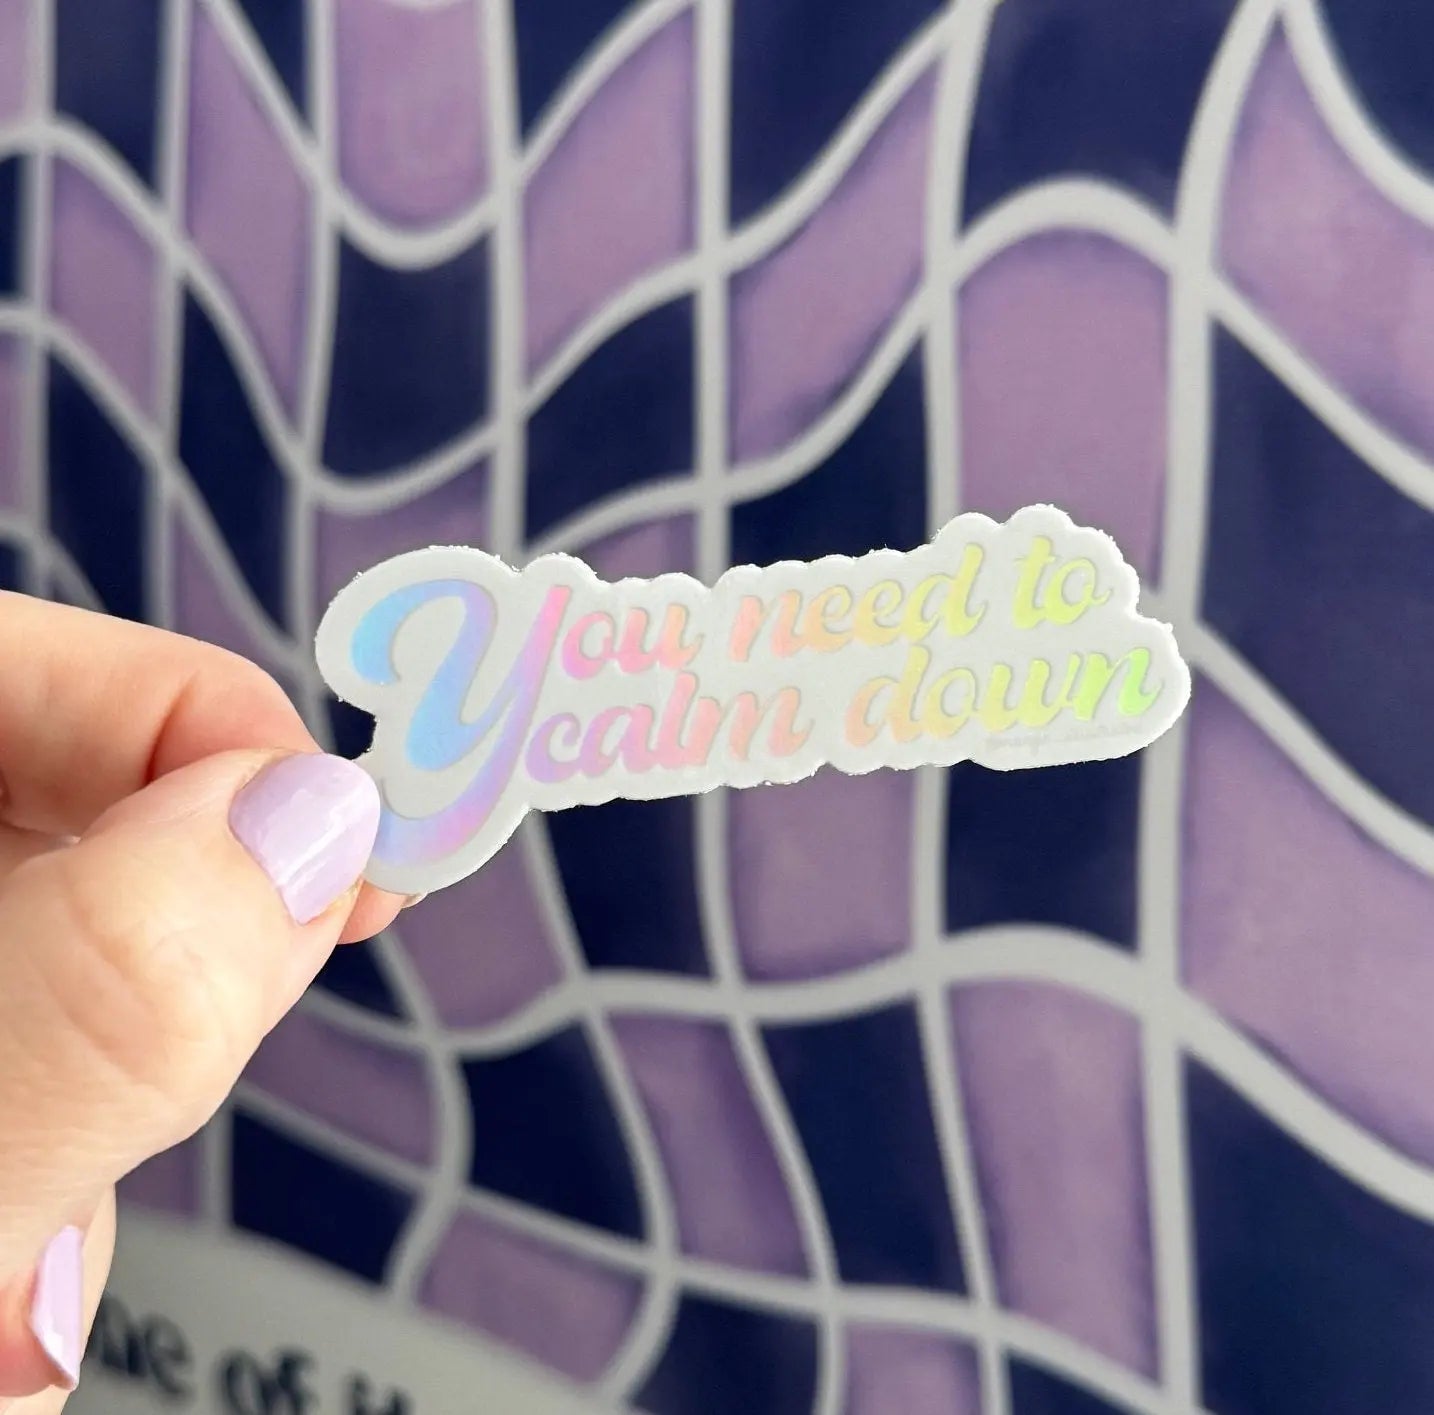 You need to calm down holographic sticker MangoIllustrated